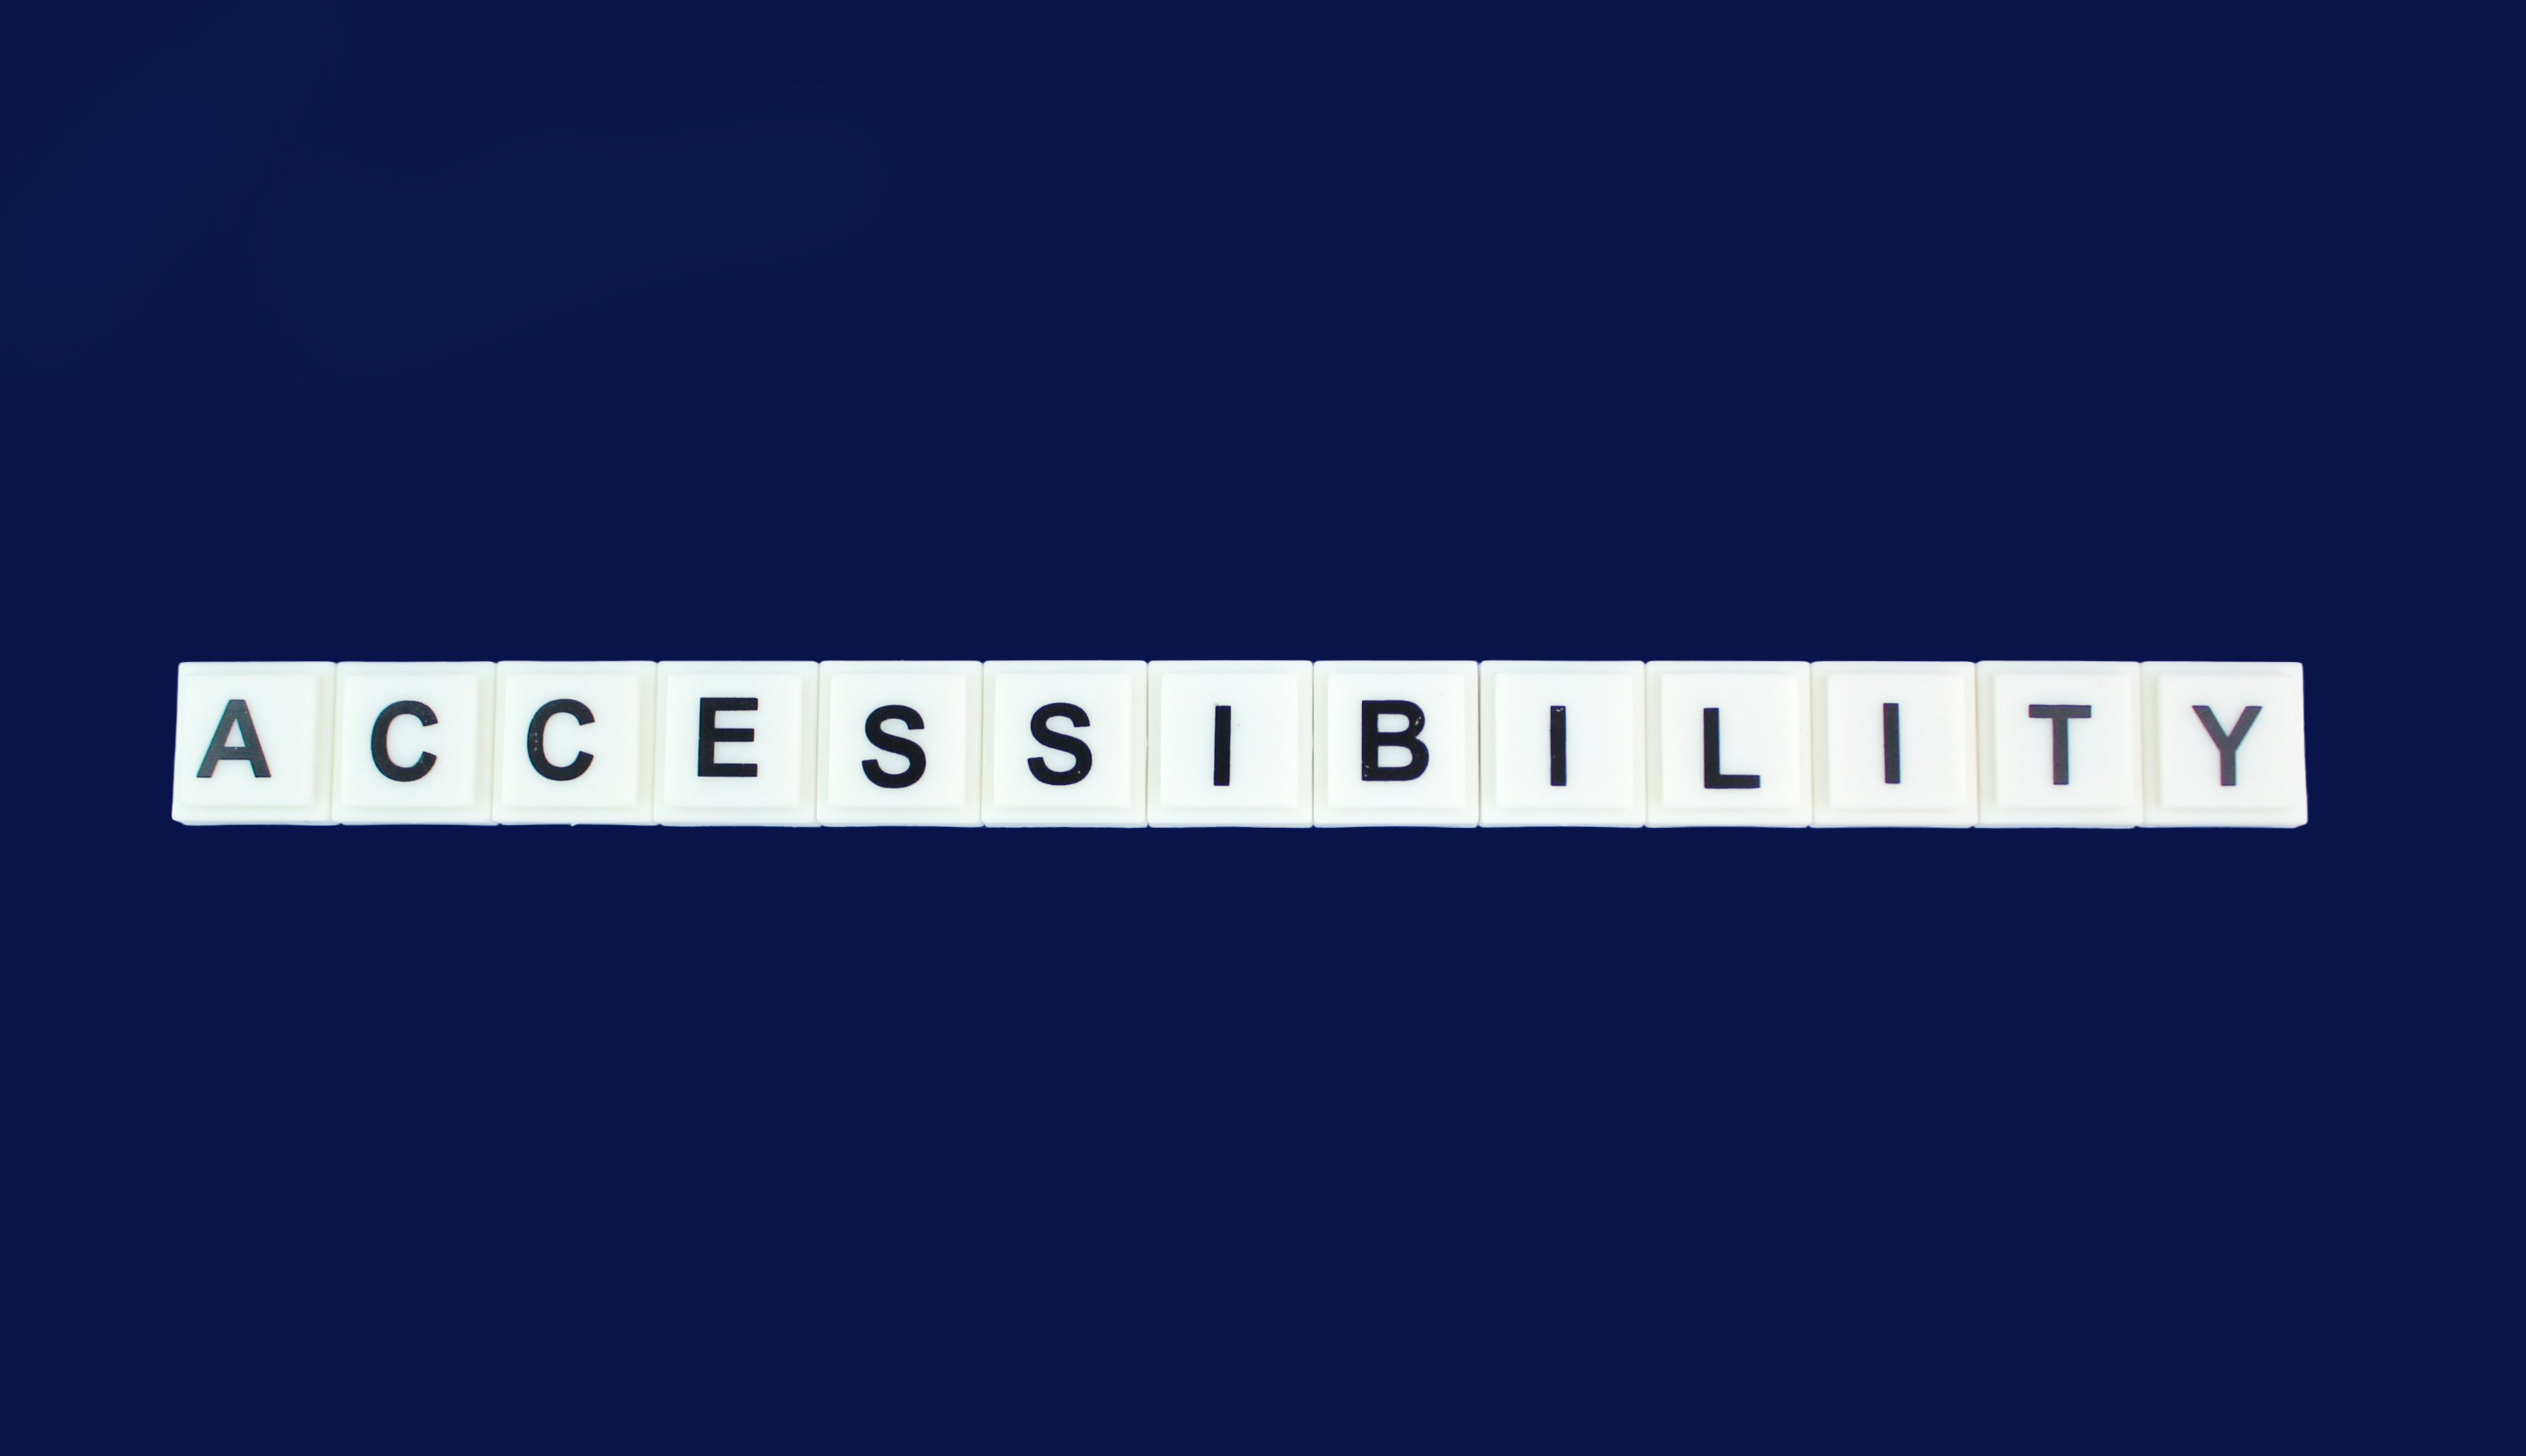 scrabble tiles spelling the word accessibility on a blue background